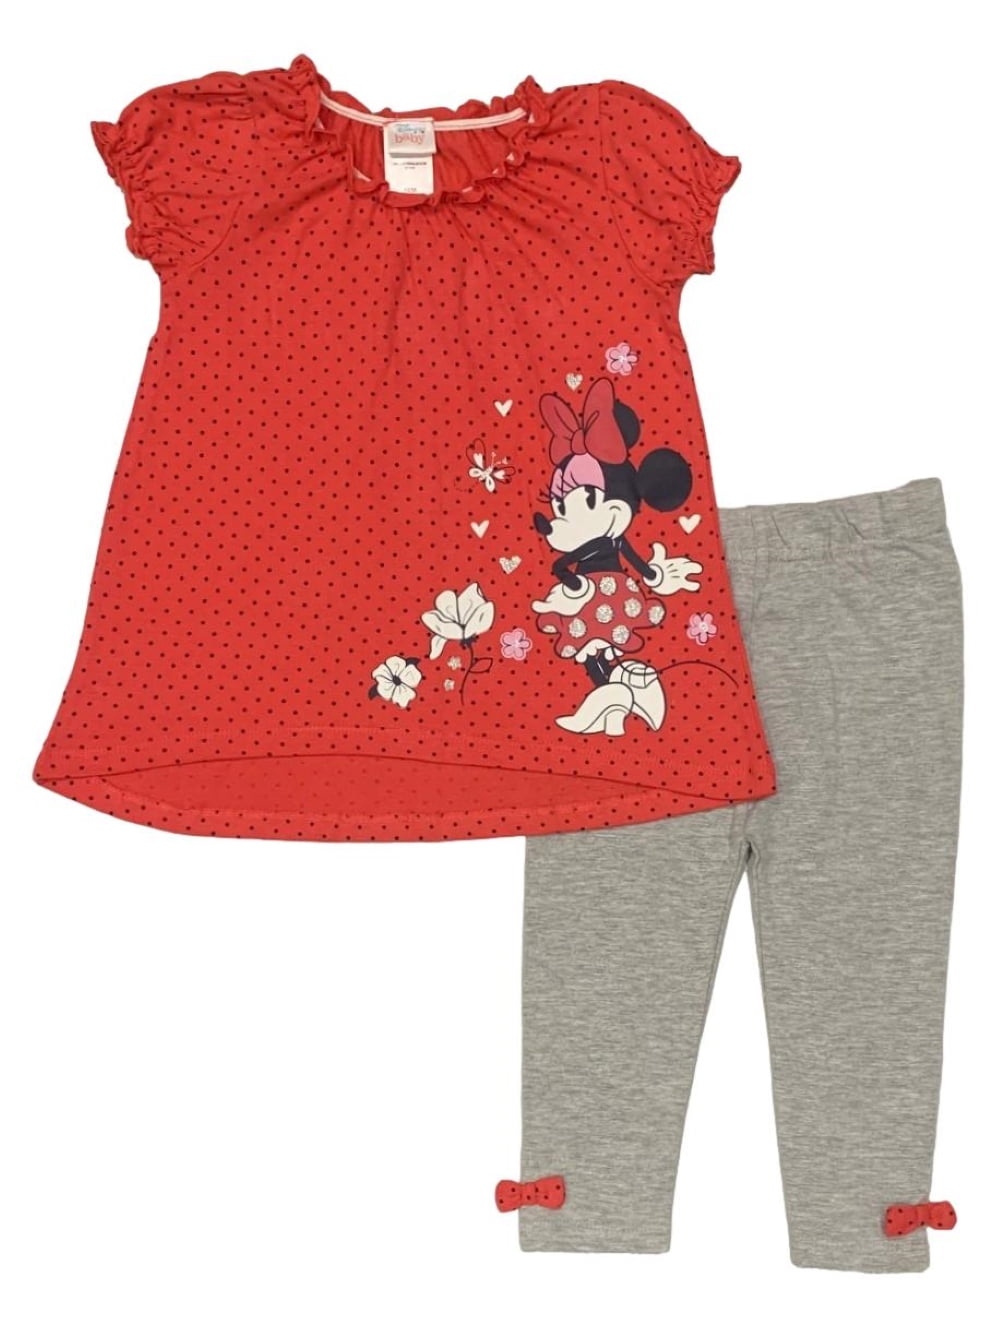 2PCS Minnie Mouse Baby Girl Polka Dot Clothes Outfit Top & Leggings Trousers 